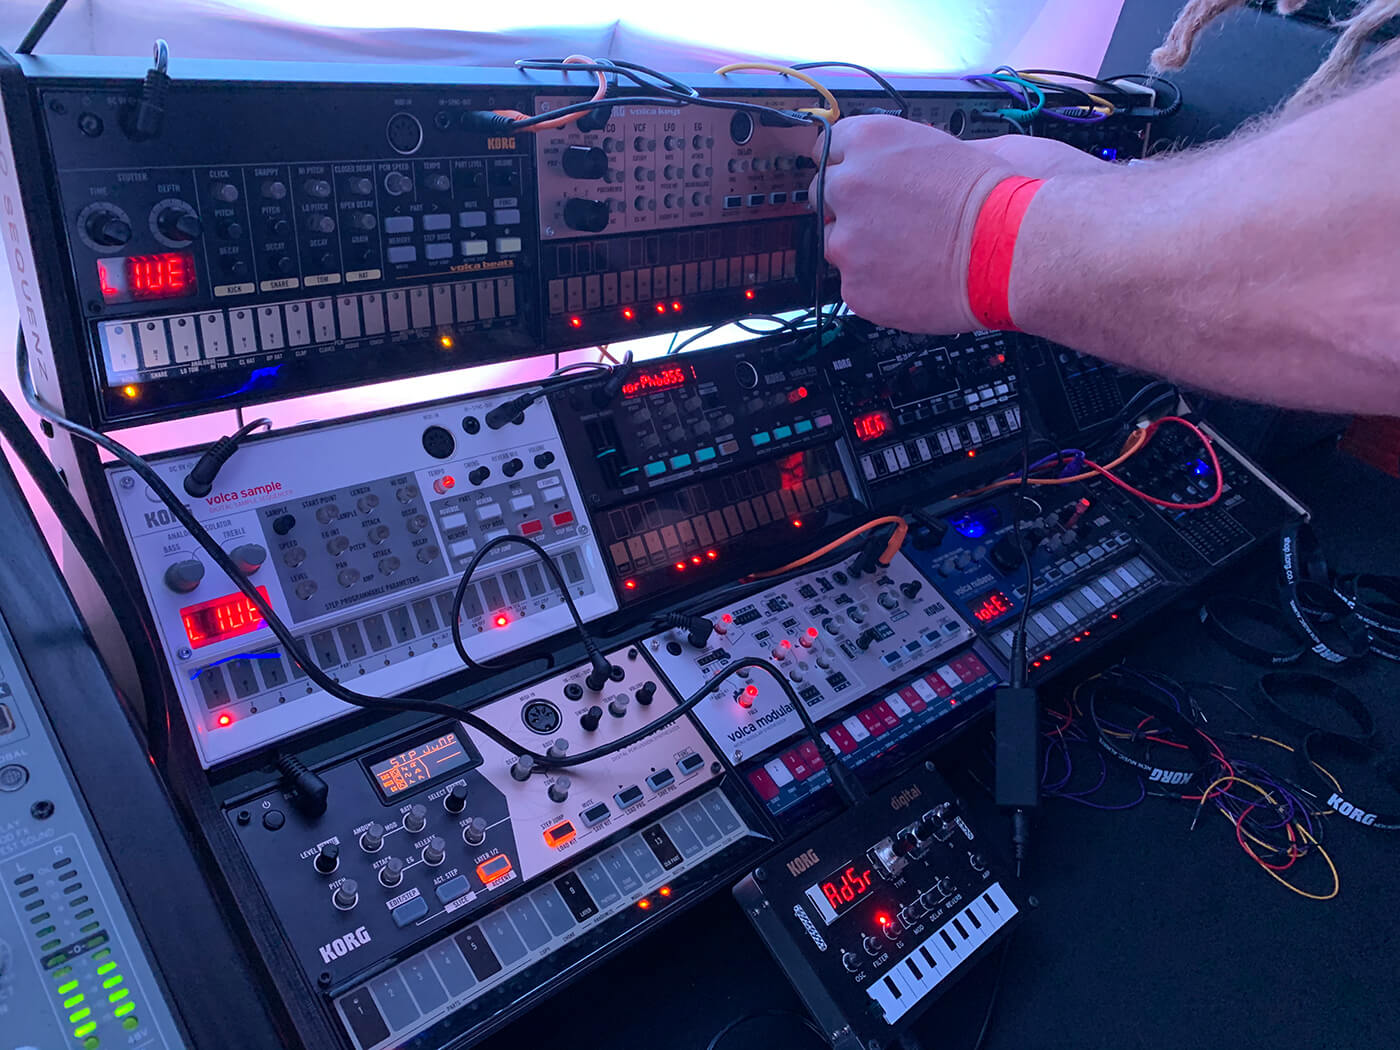 Luke from Korg speculates on the mini ARP 2600, Opsix and future Volcas